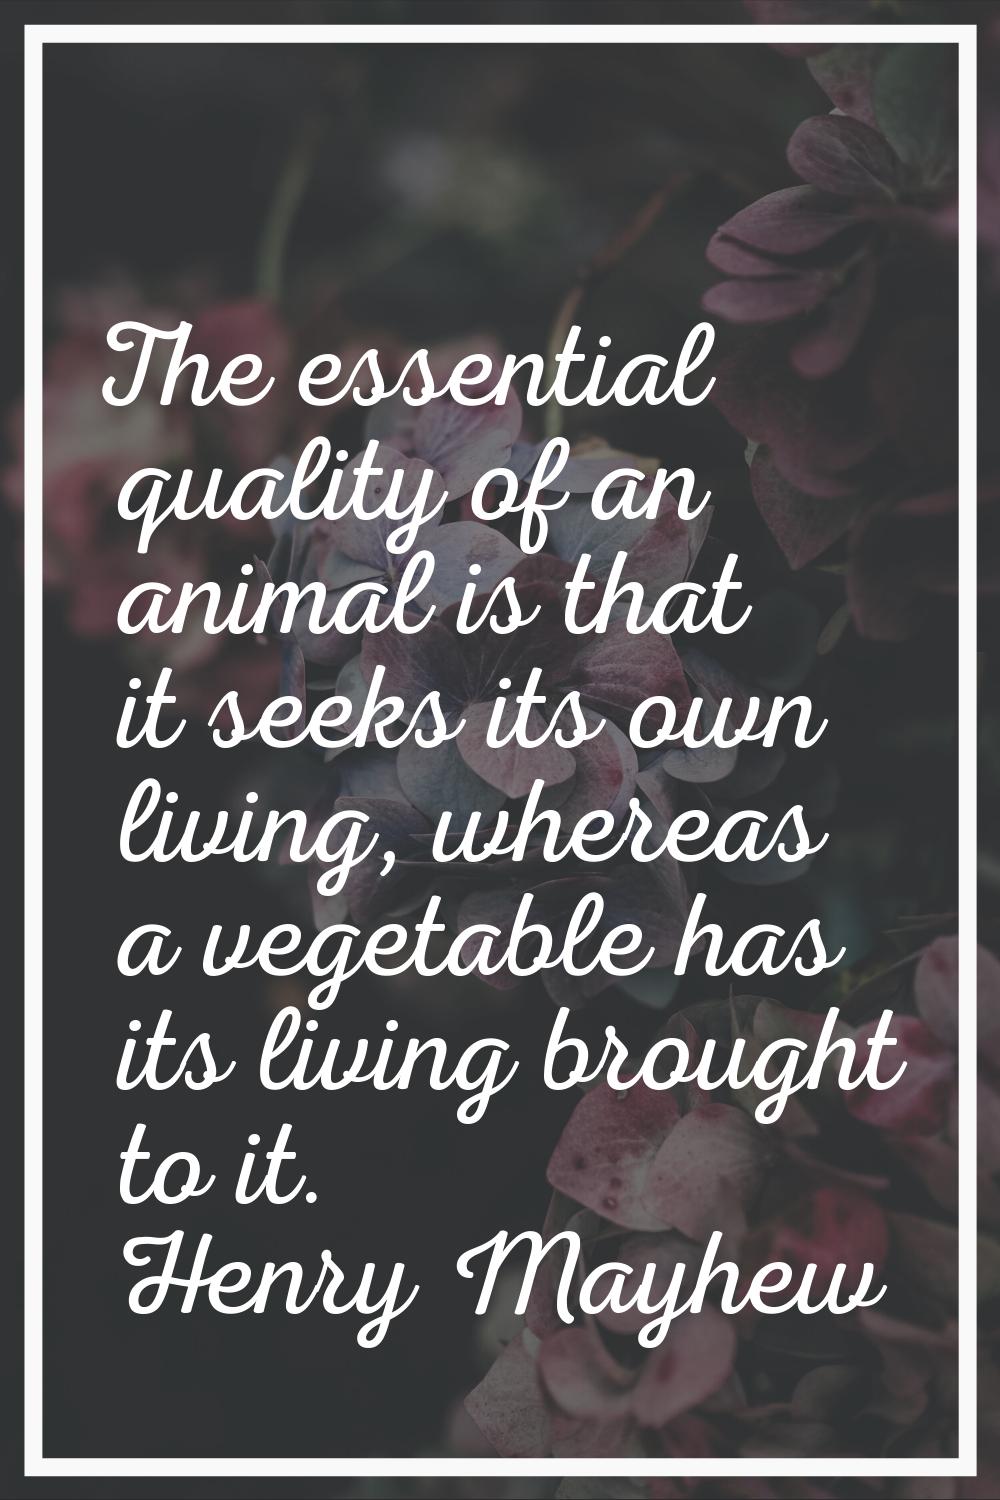 The essential quality of an animal is that it seeks its own living, whereas a vegetable has its liv